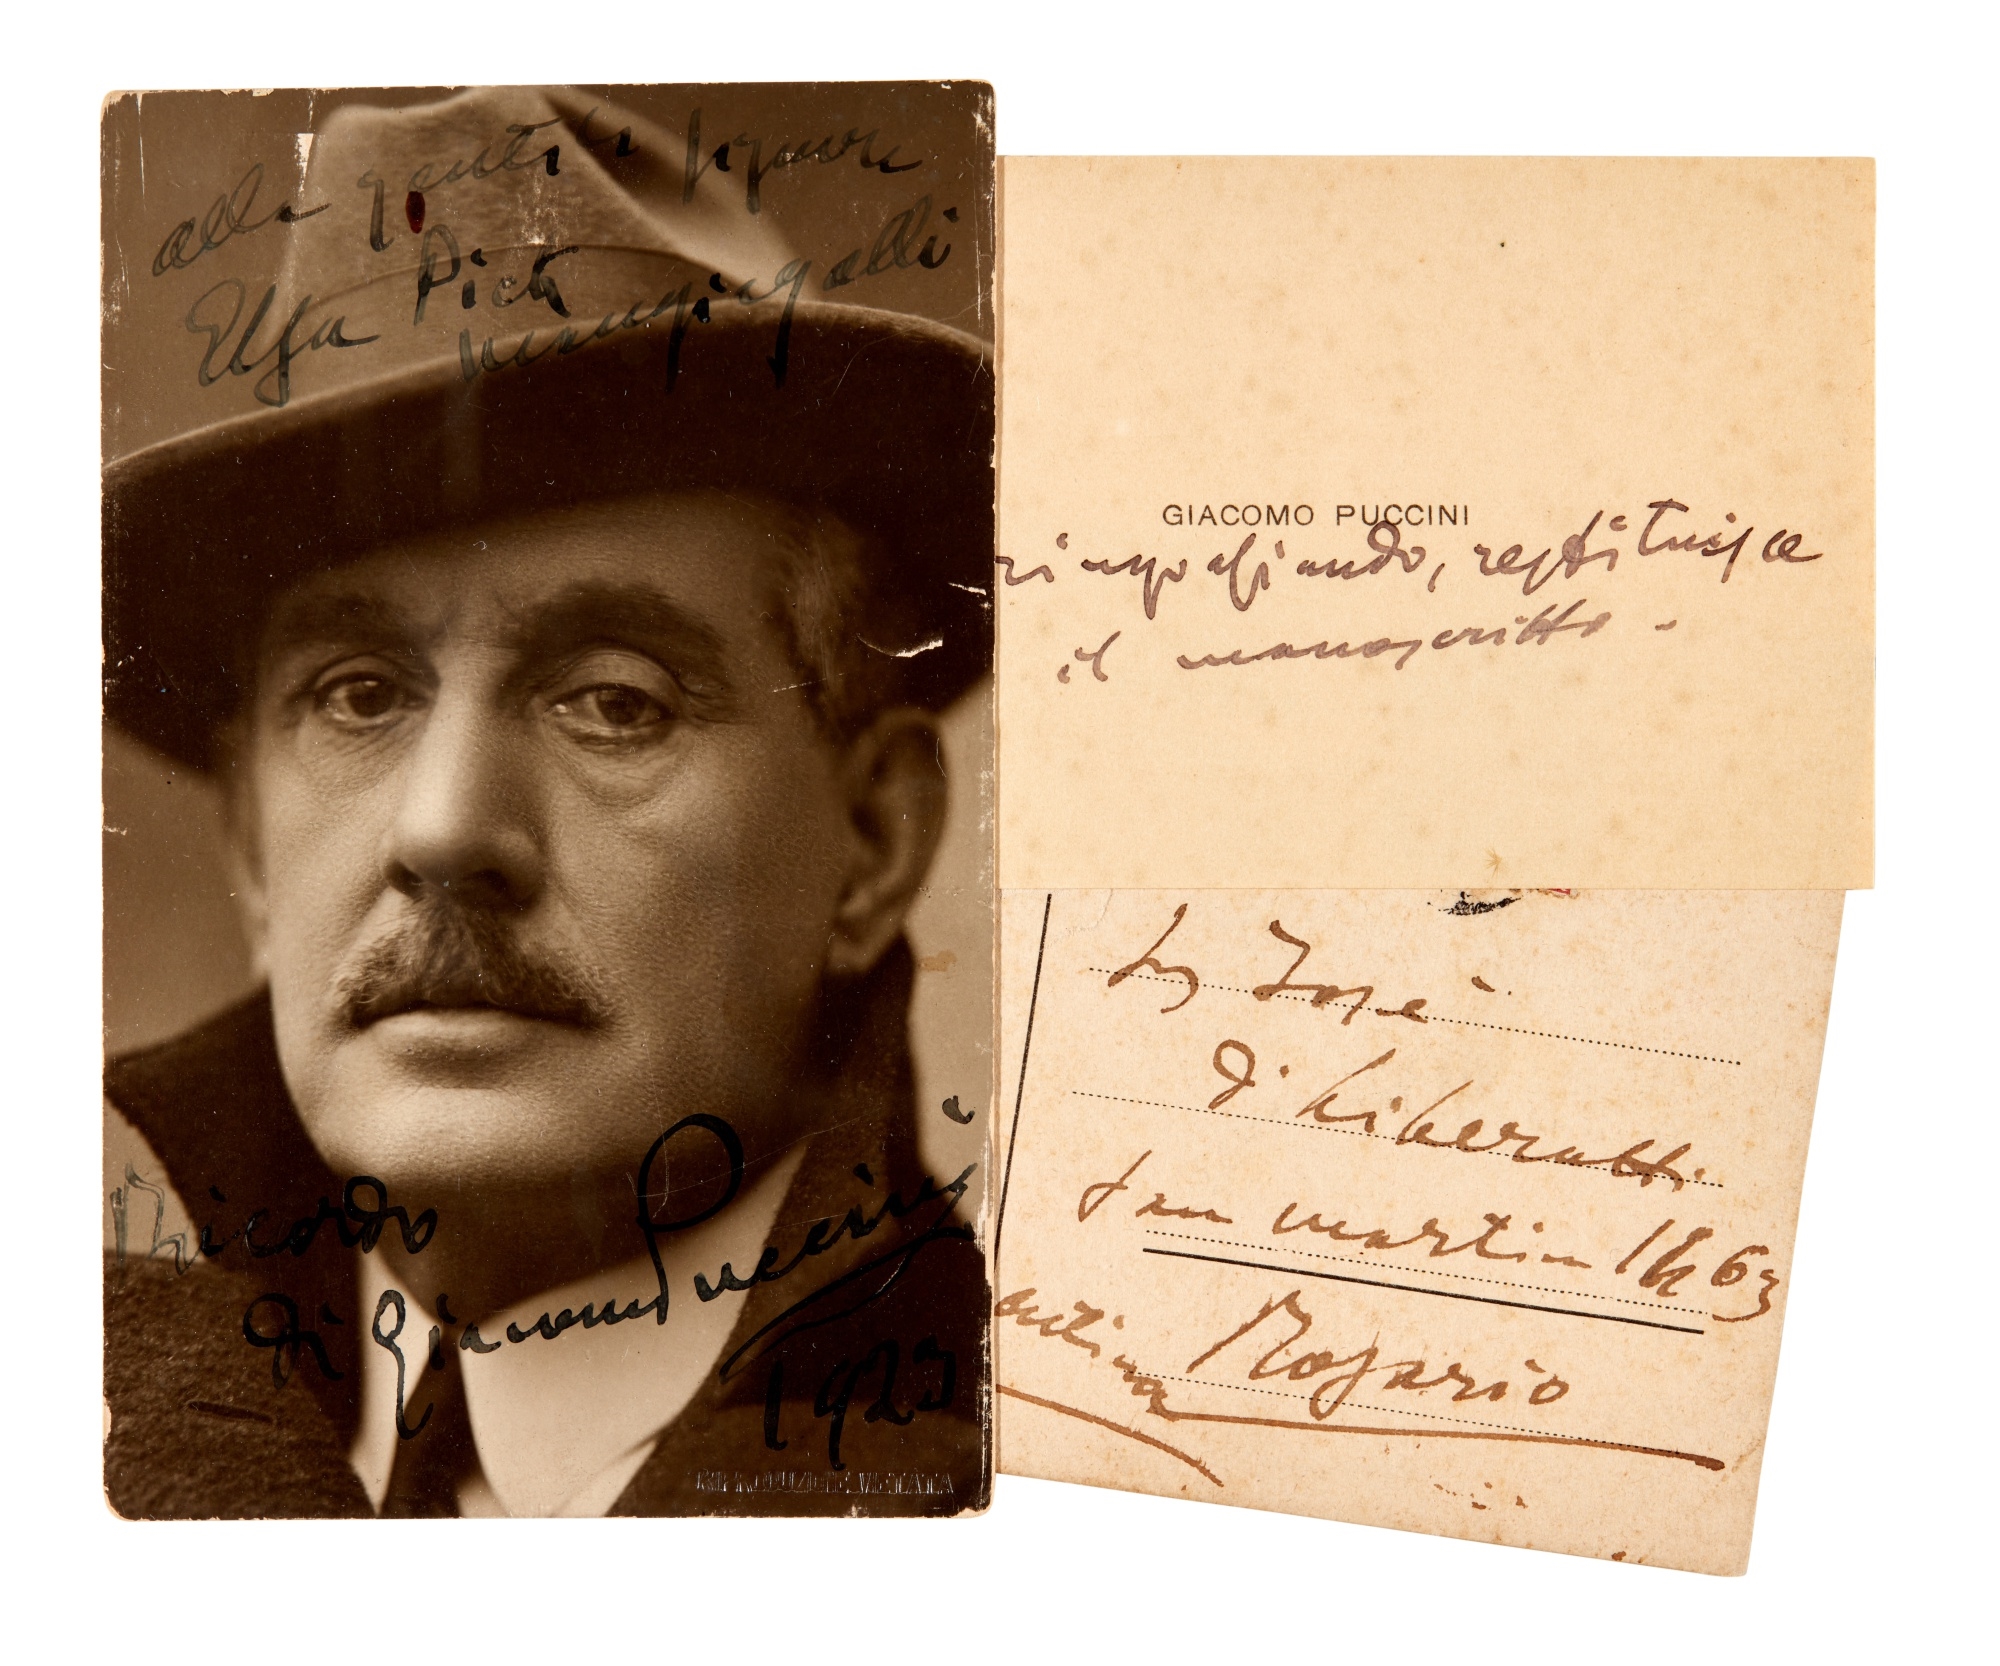 G. Puccini. Photograph signed and inscribed by Giacomo Puccini, 1923